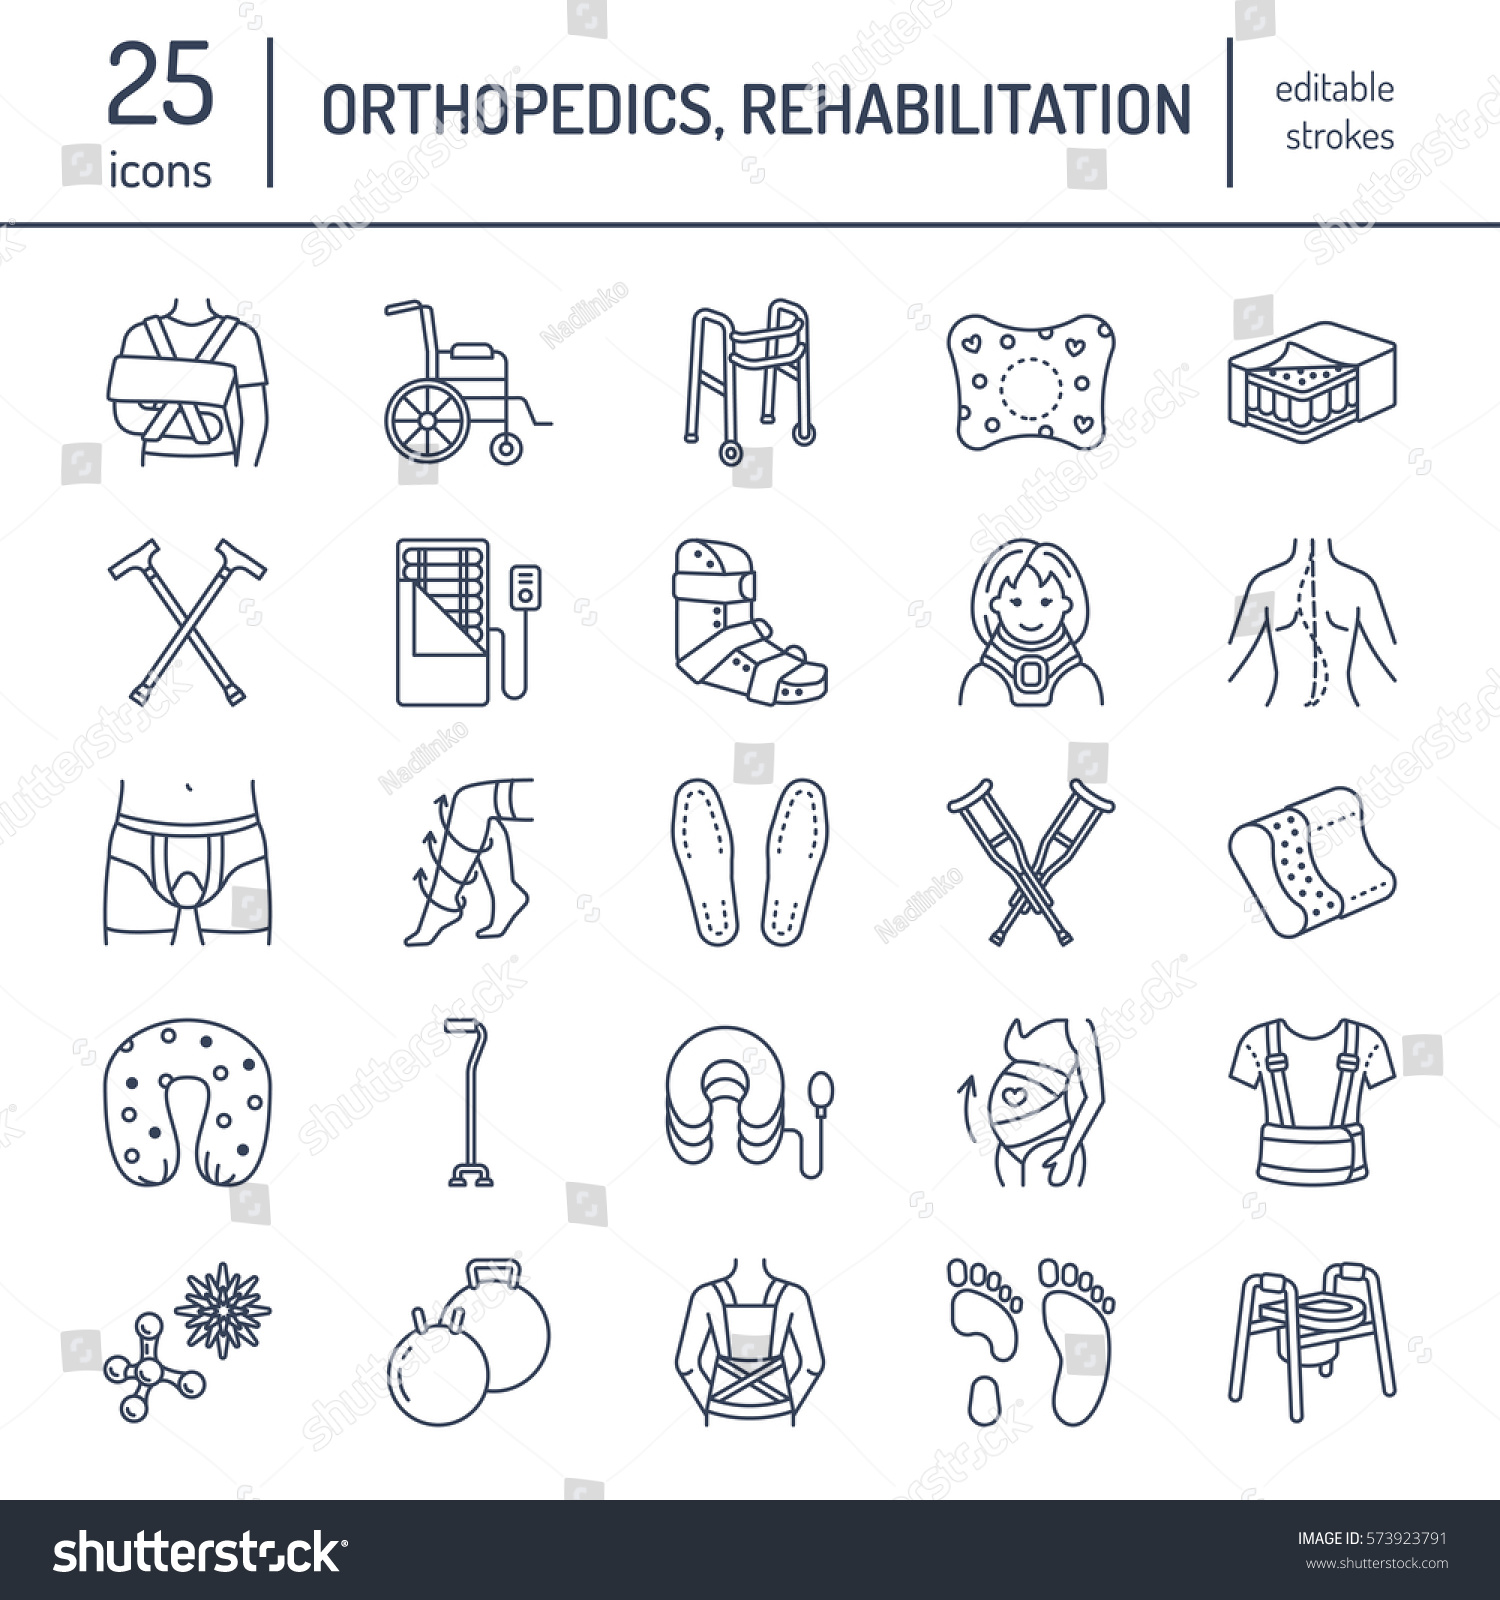 SVG of Orthopedic, trauma rehabilitation line icons. Crutches, orthopedics mattress pillow, cervical collar, walkers and other medical rehab goods. Health care thin linear signs for clinic and hospital svg